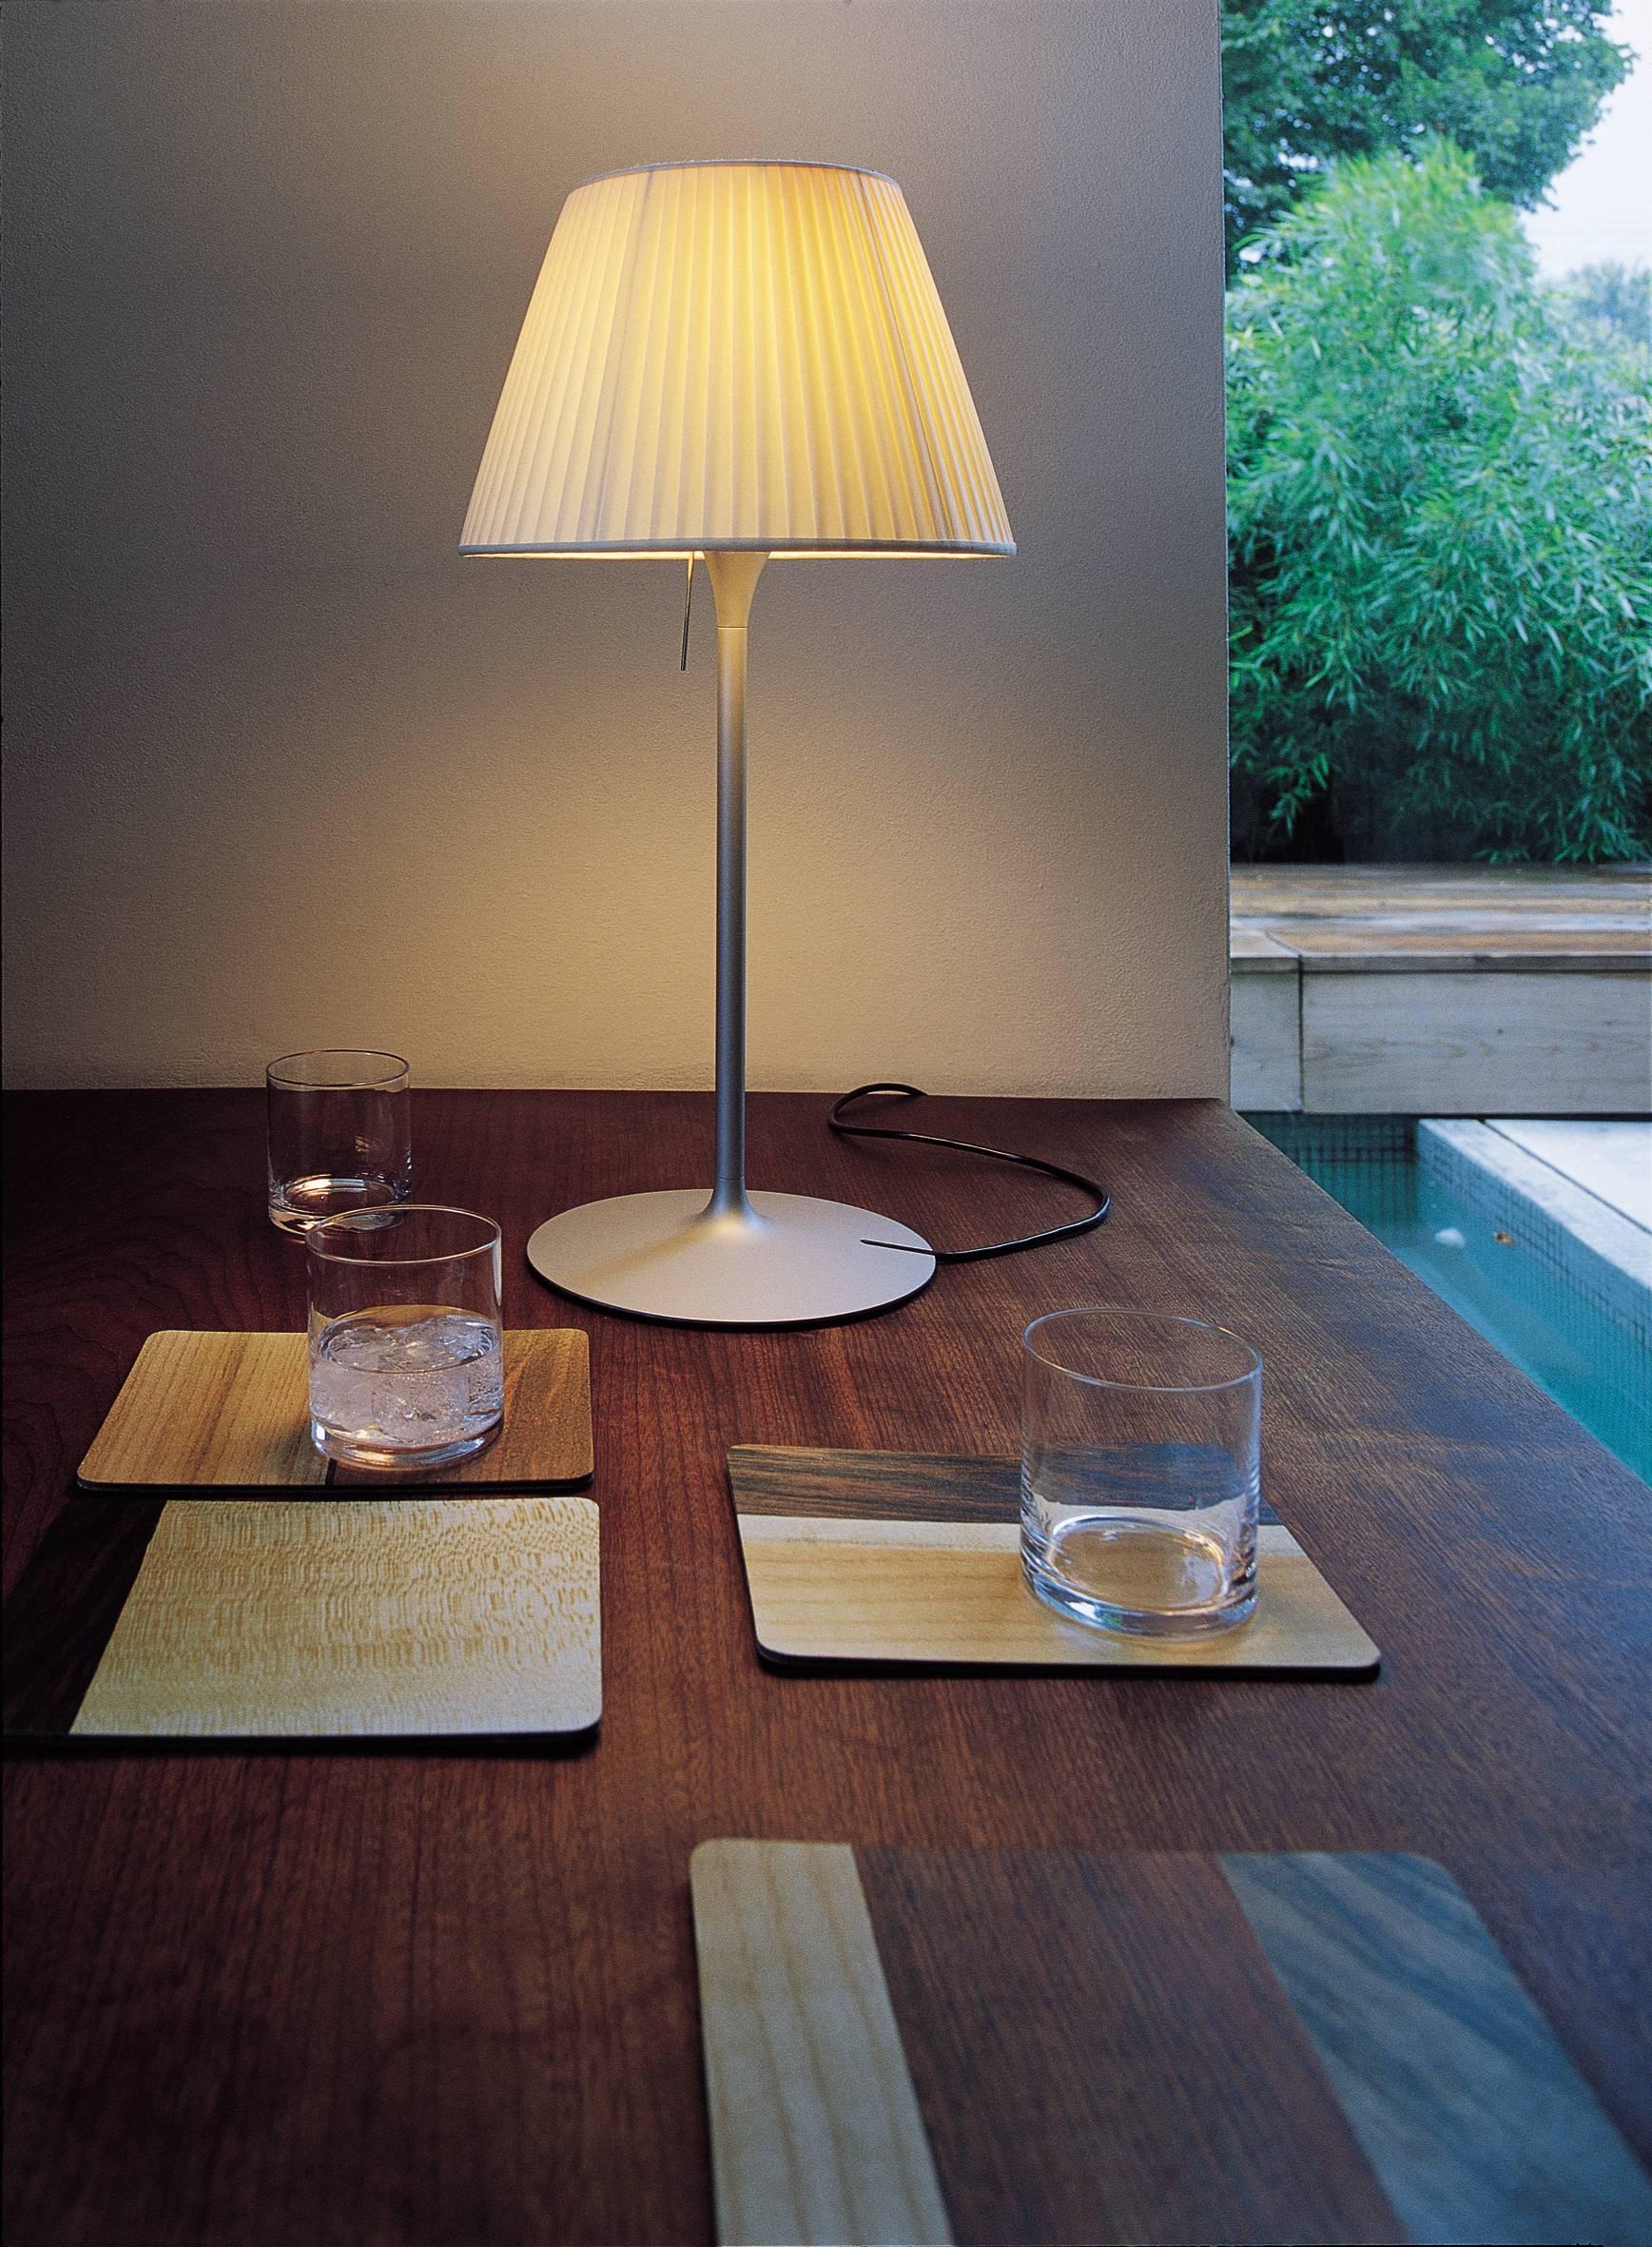 Part of the Romeo family created by industry innovator Philippe Starck, this stunning and strikingly simple table lamp provides diffused light through a plissé cloth shade and acid-etched pressed borosilicate glass internal diffuser. The steel stem